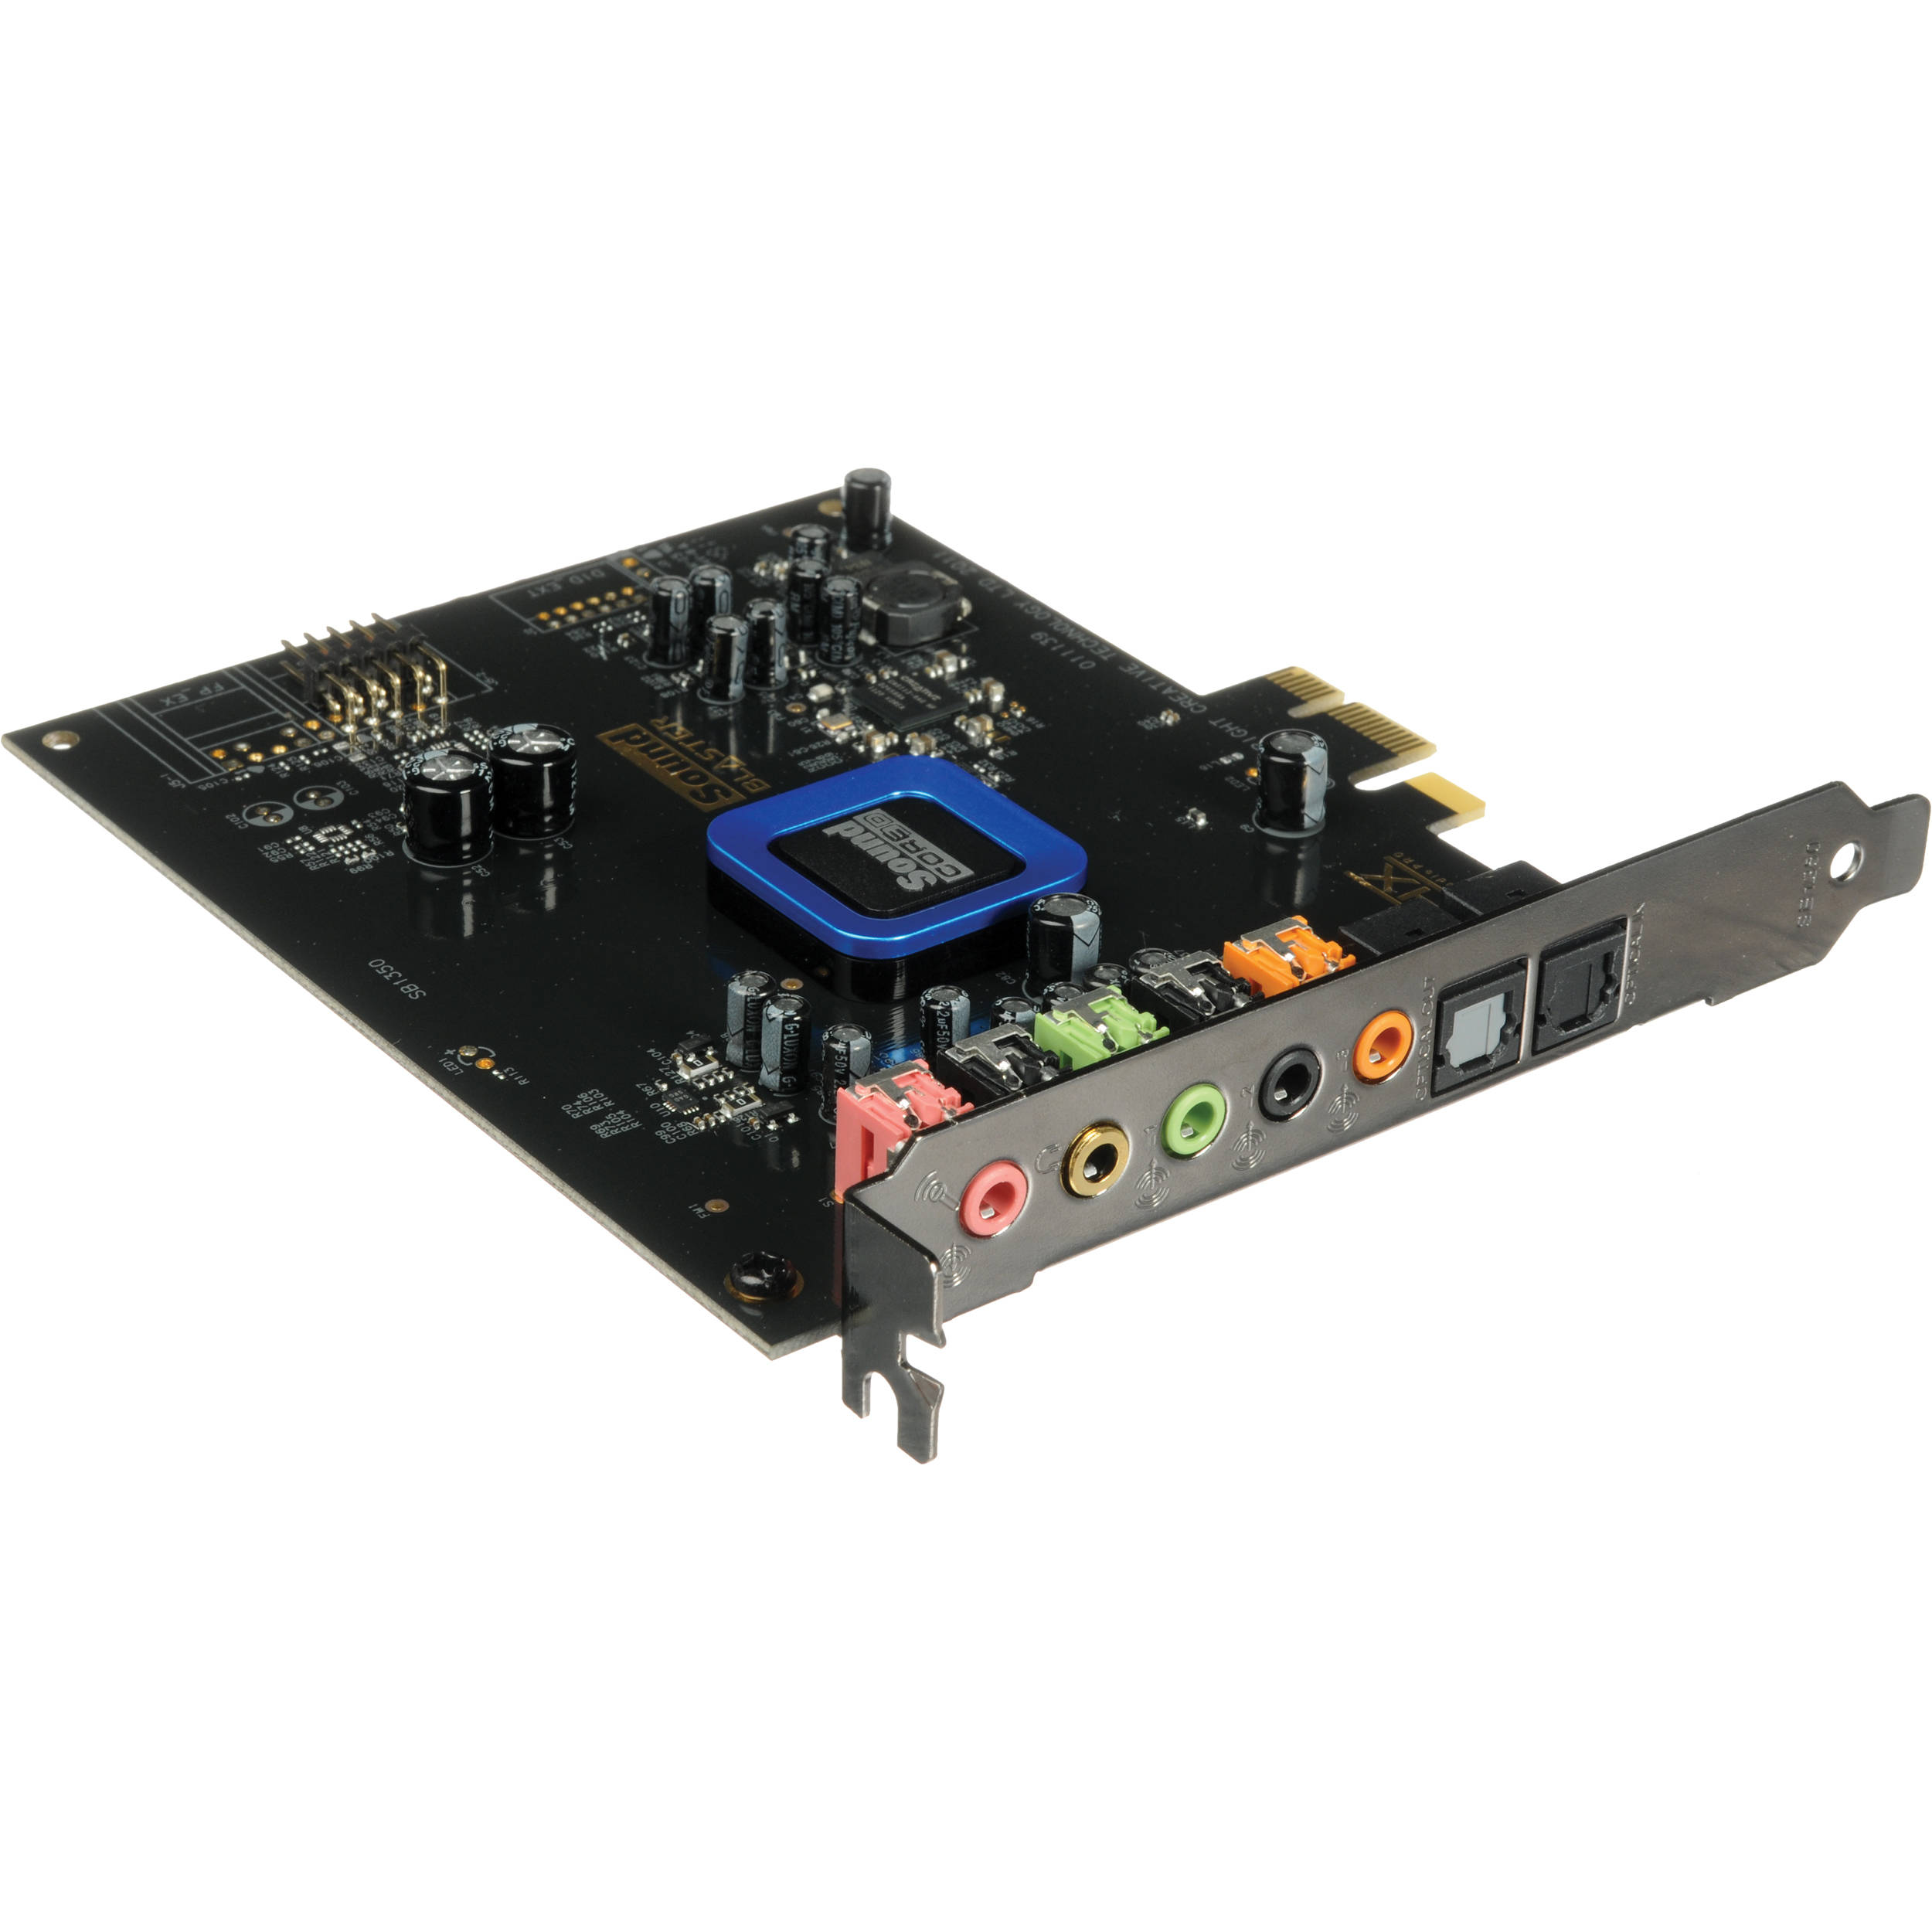 CREATIVE SOUND BLASTER RECON3D PCIE DRIVERS FOR WINDOWS 8